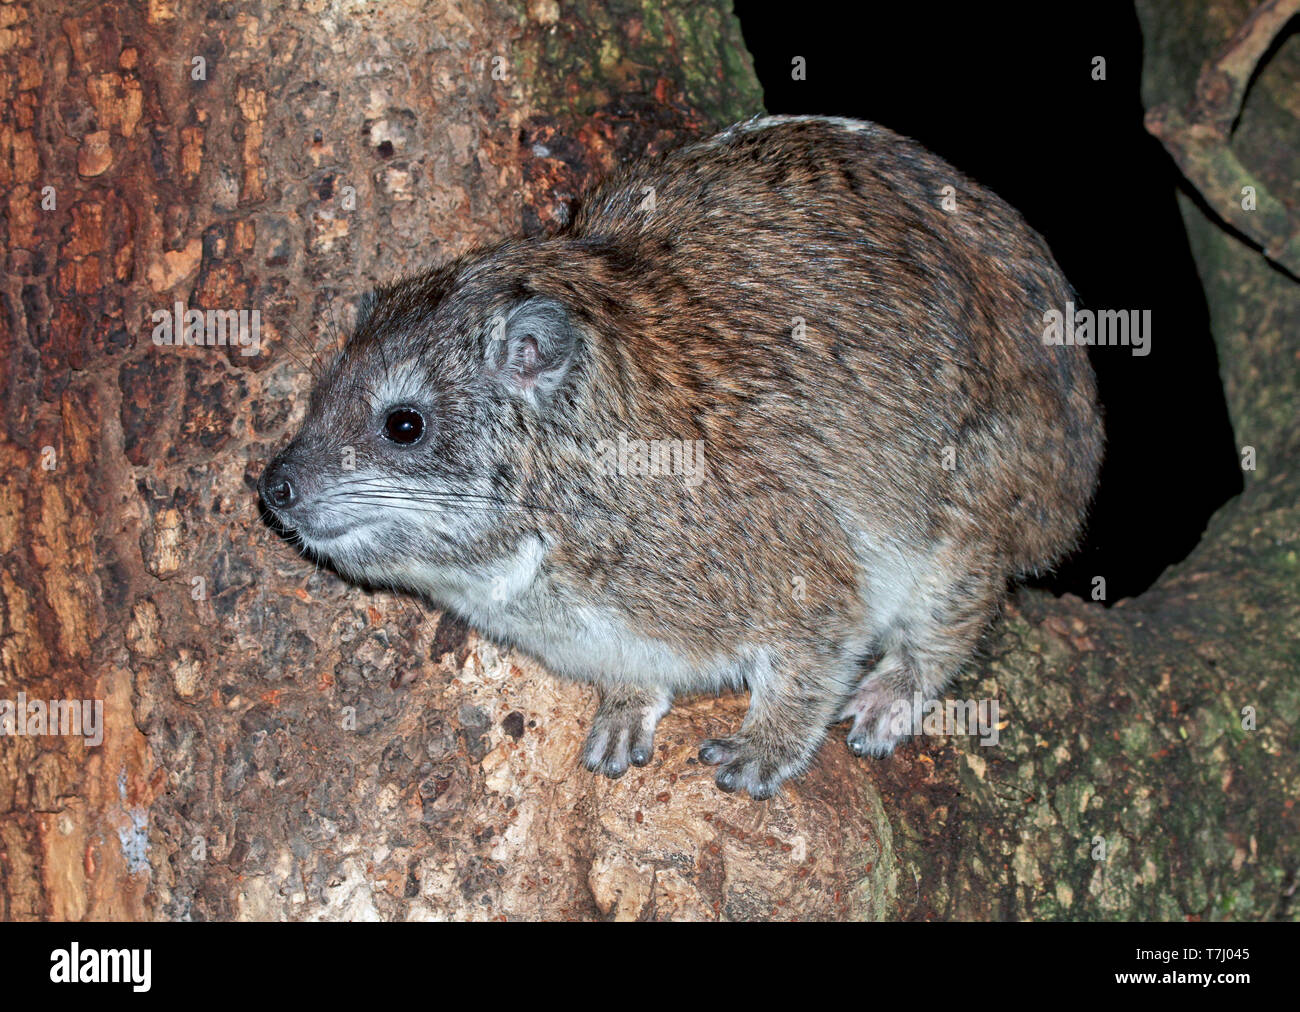 Southern tree hyrax (Dendrohyrax arboreus) perched in a tree by night Stock Photo